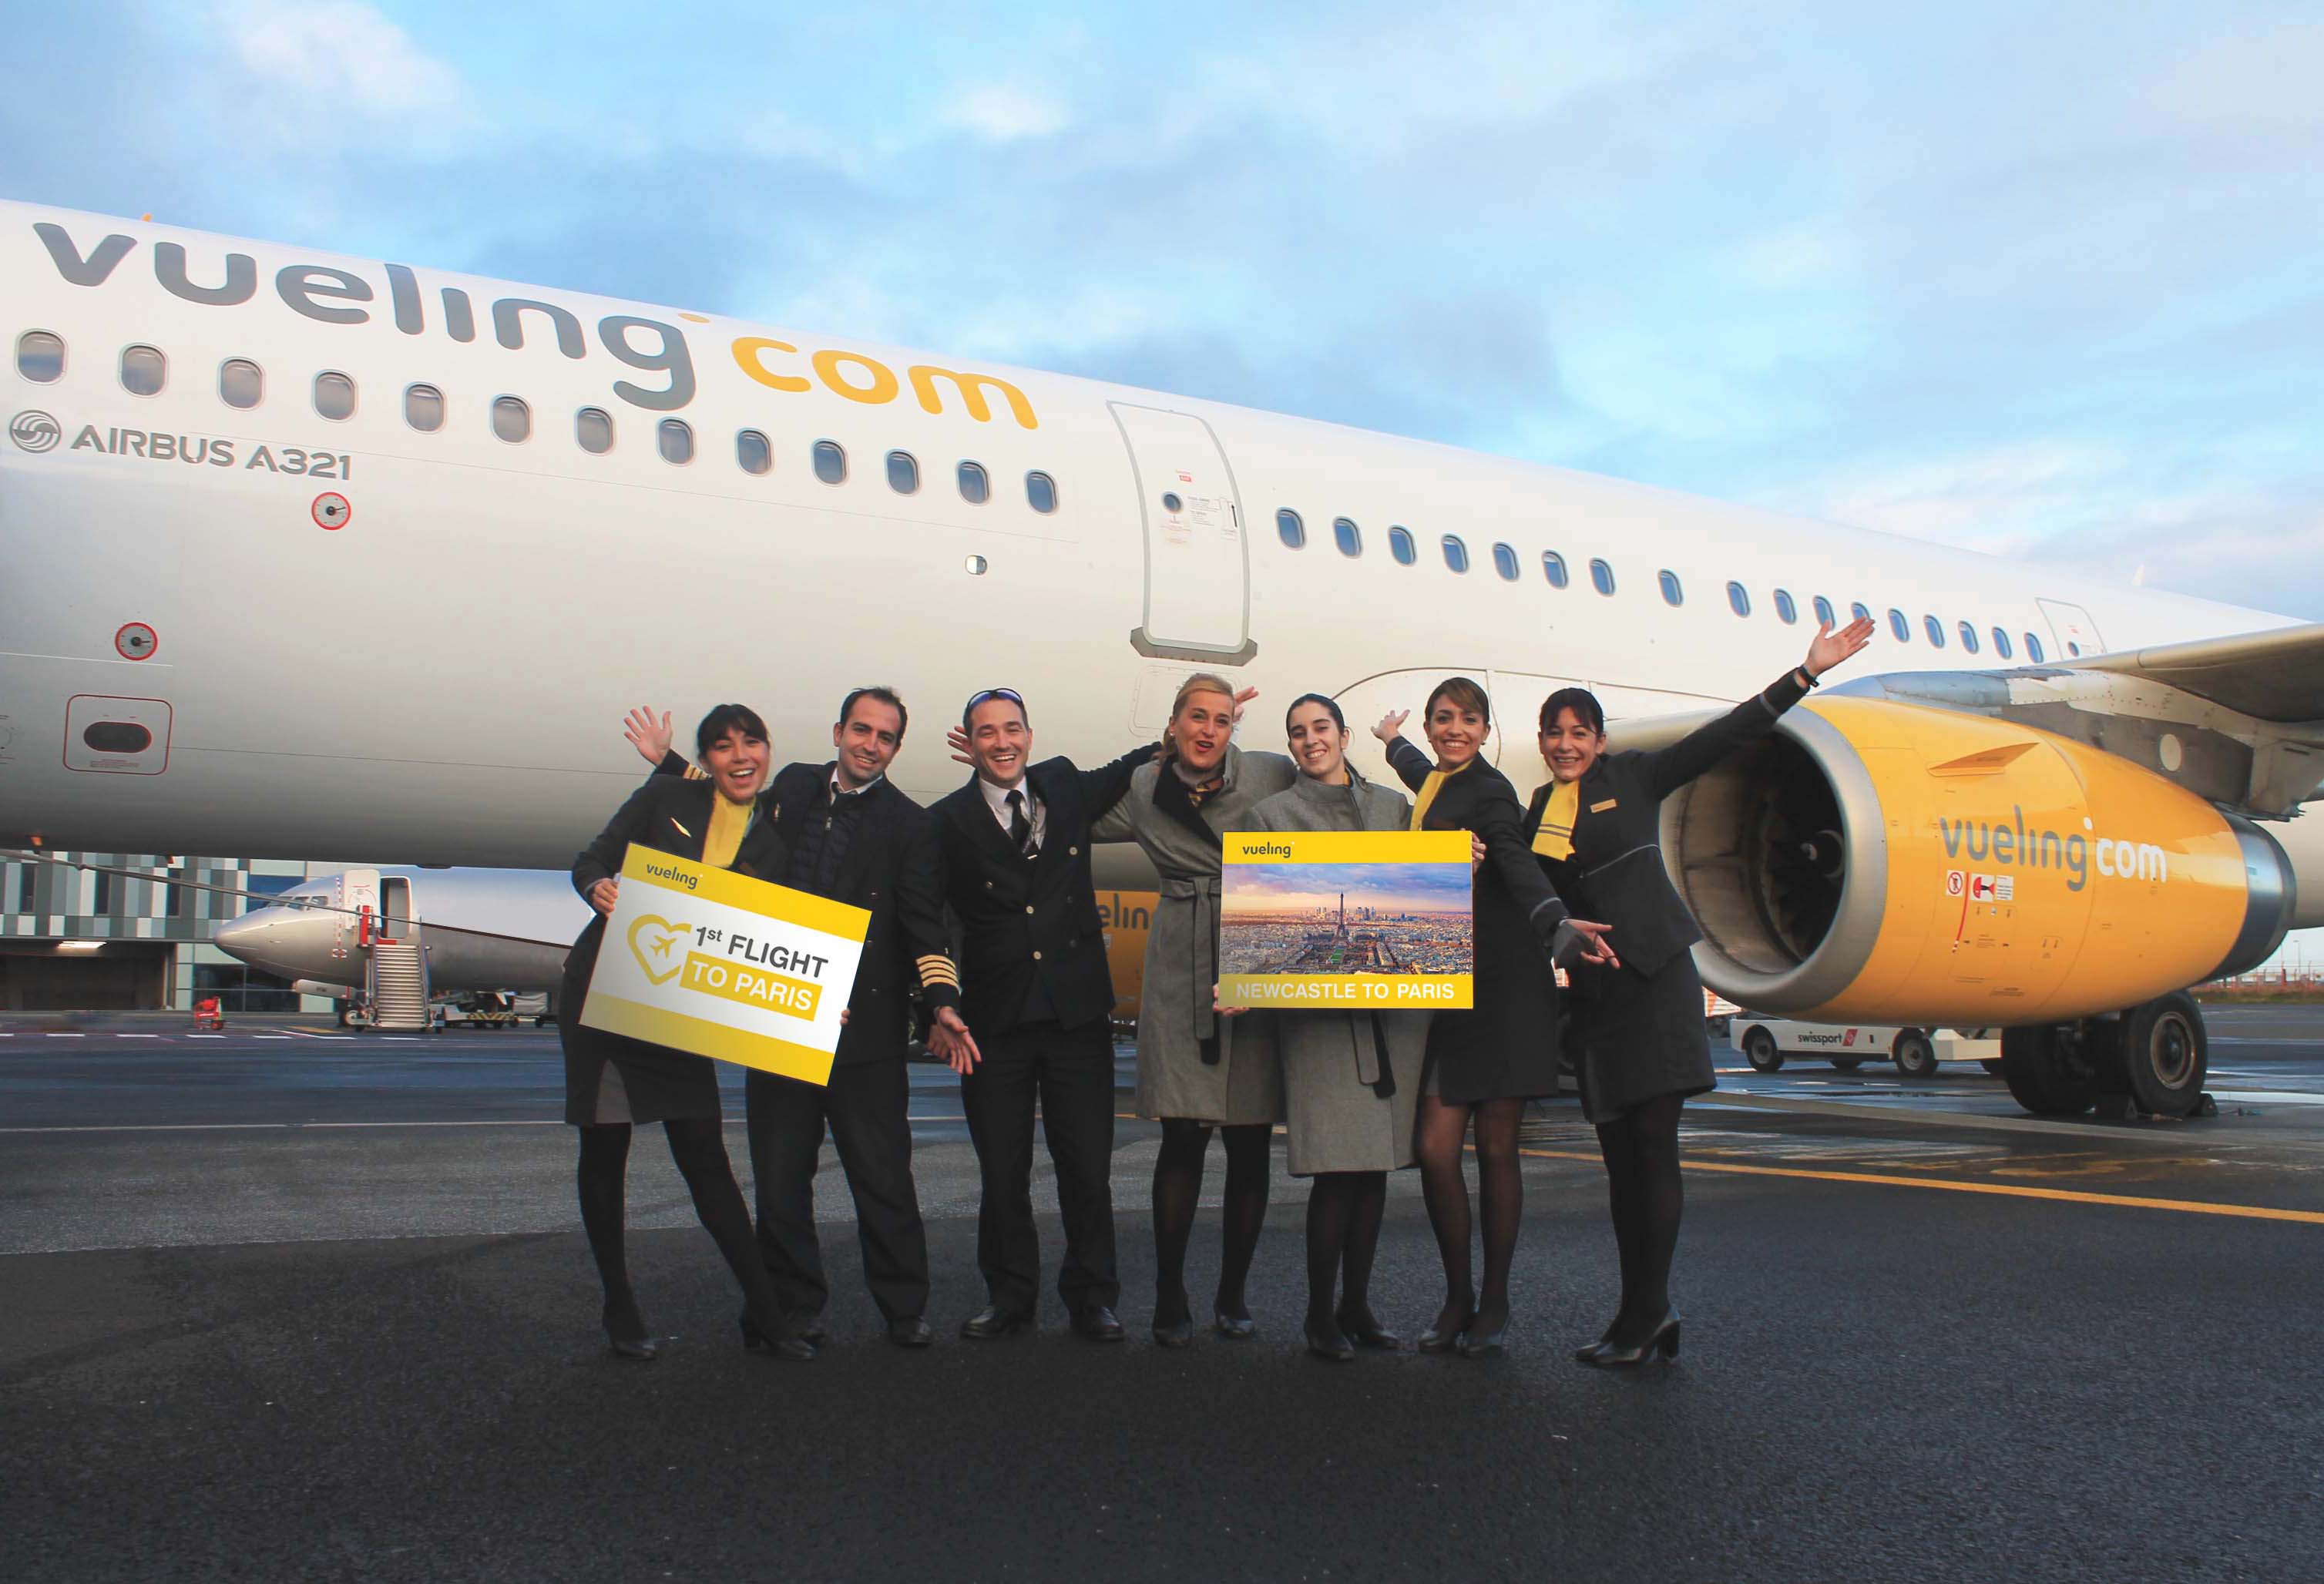 Airline staff pose in front of white and yellow Veuling plane